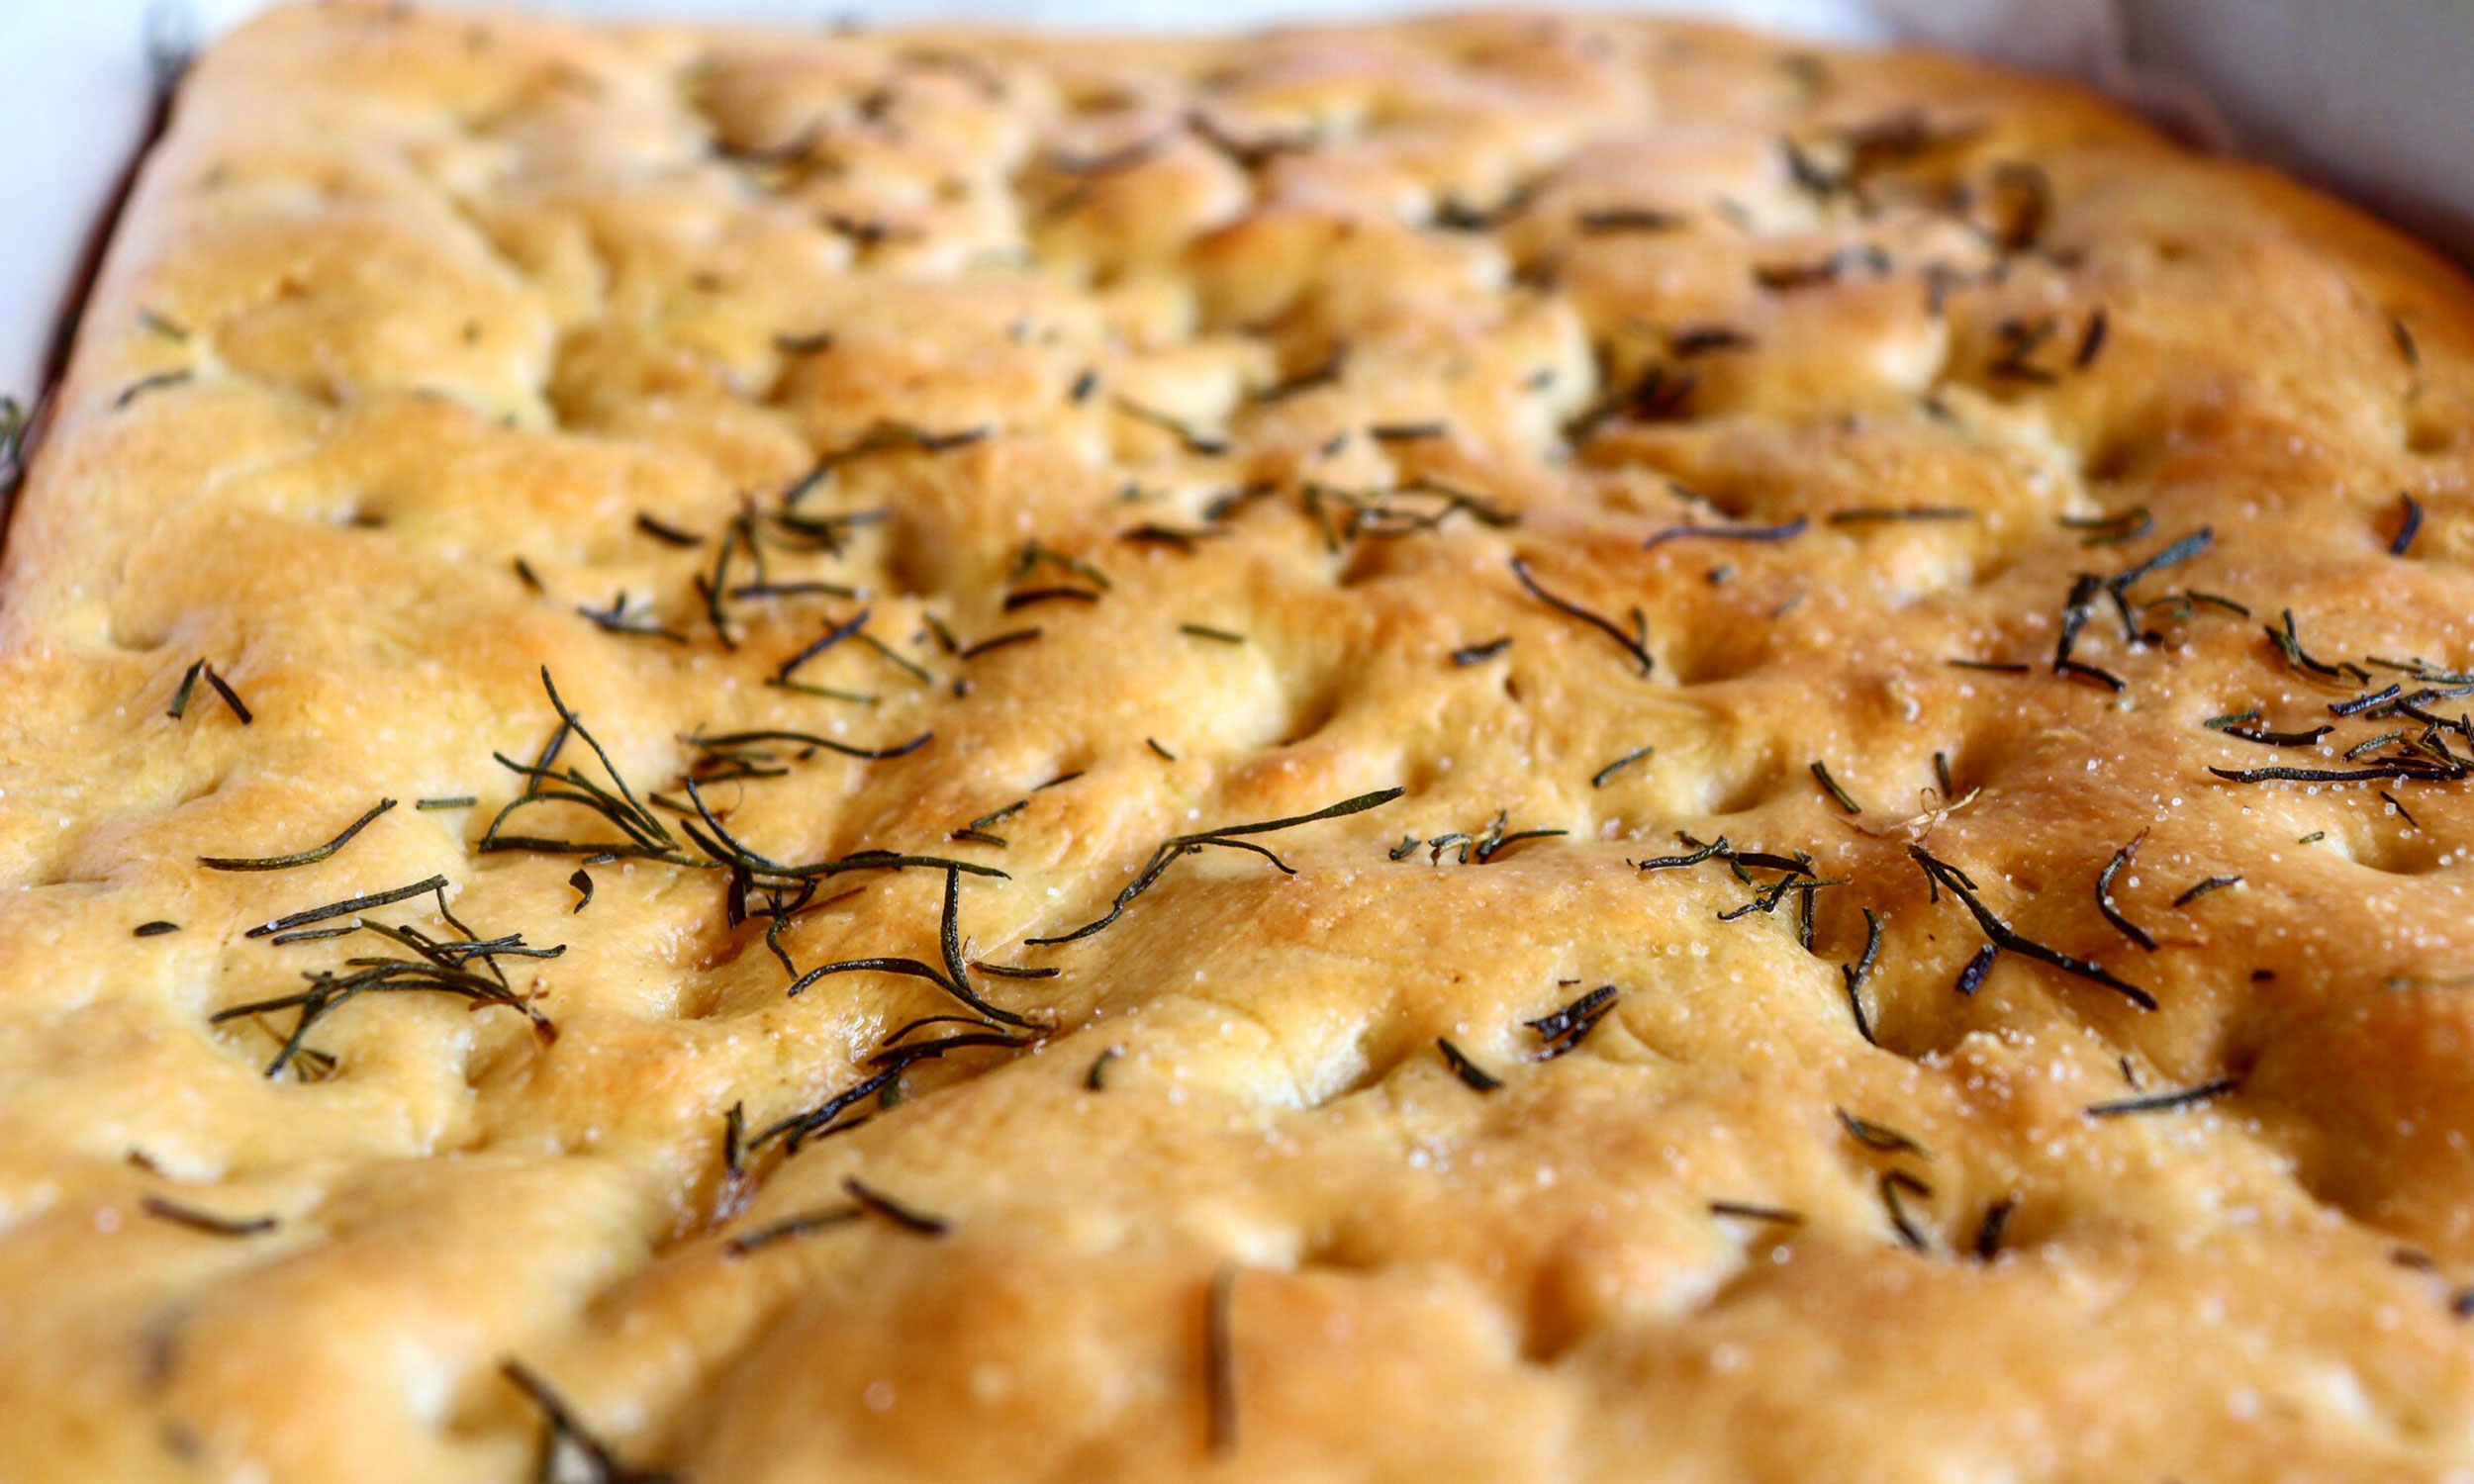 Infuse Your Oil With Rosemary And Garlic For Amazing Focaccia Bread